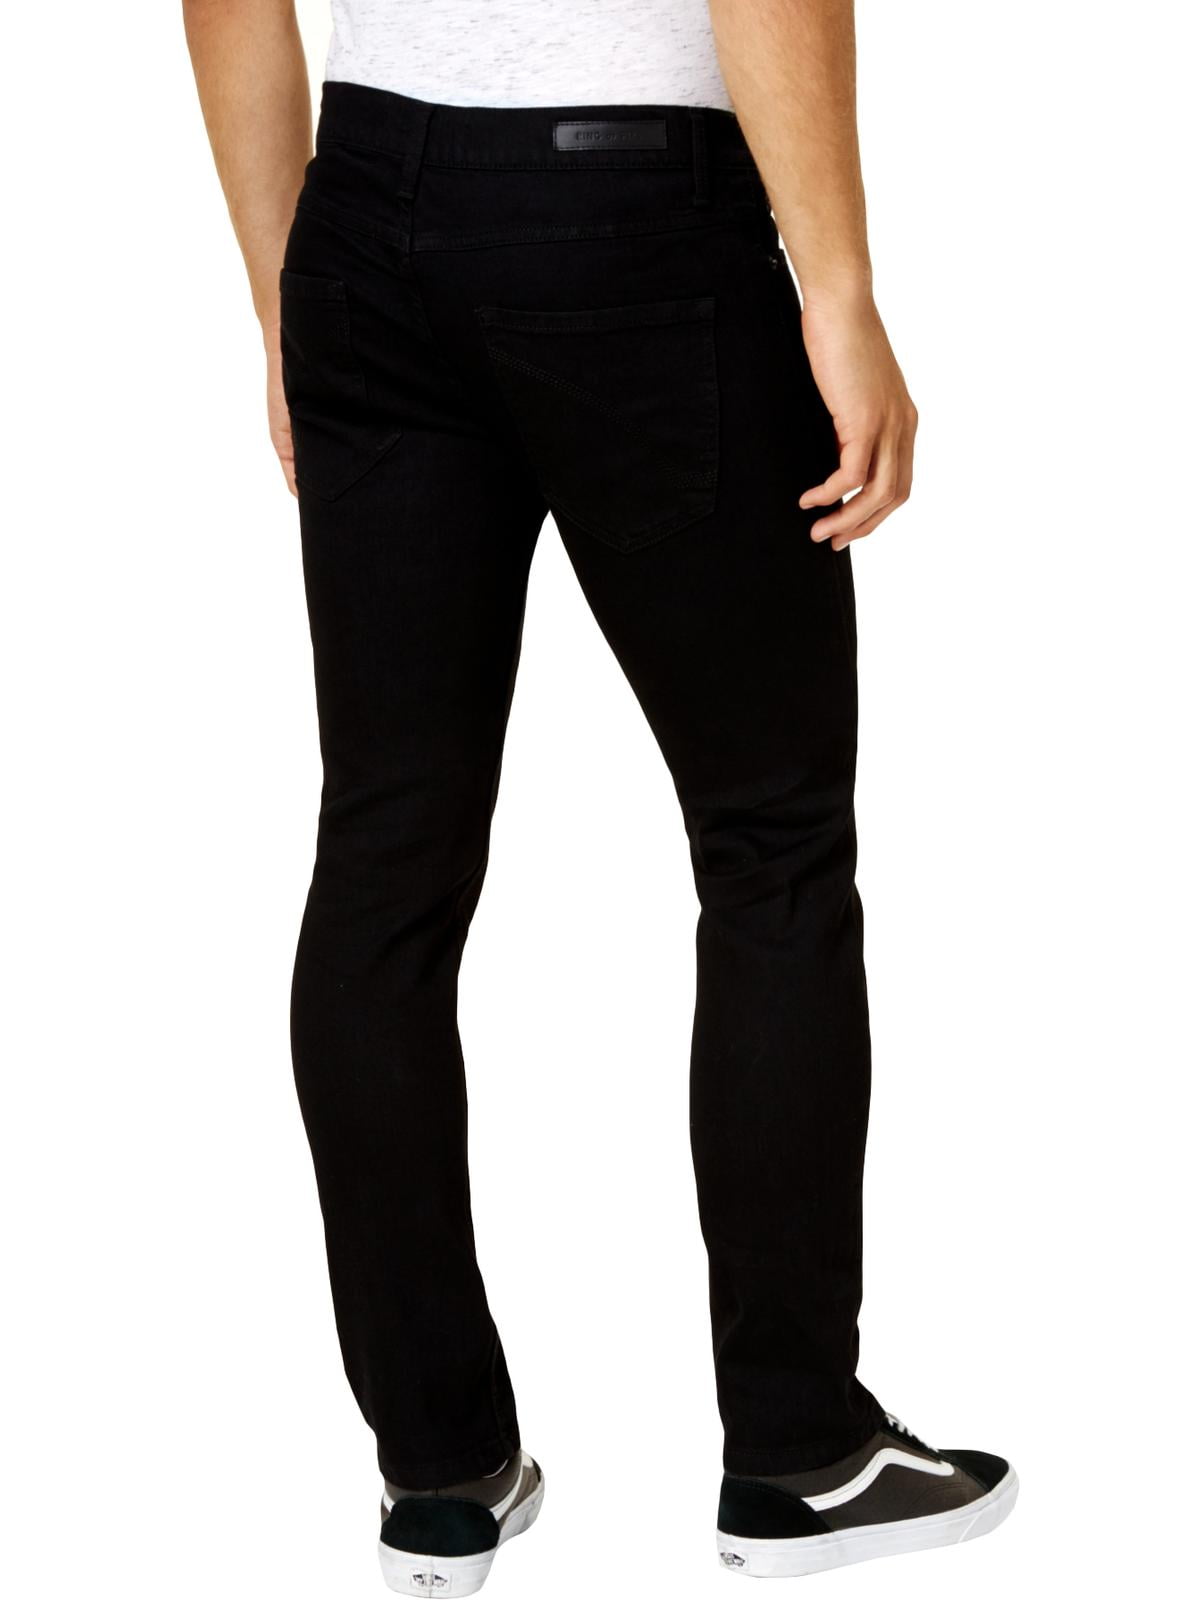 ring of fire black jeans